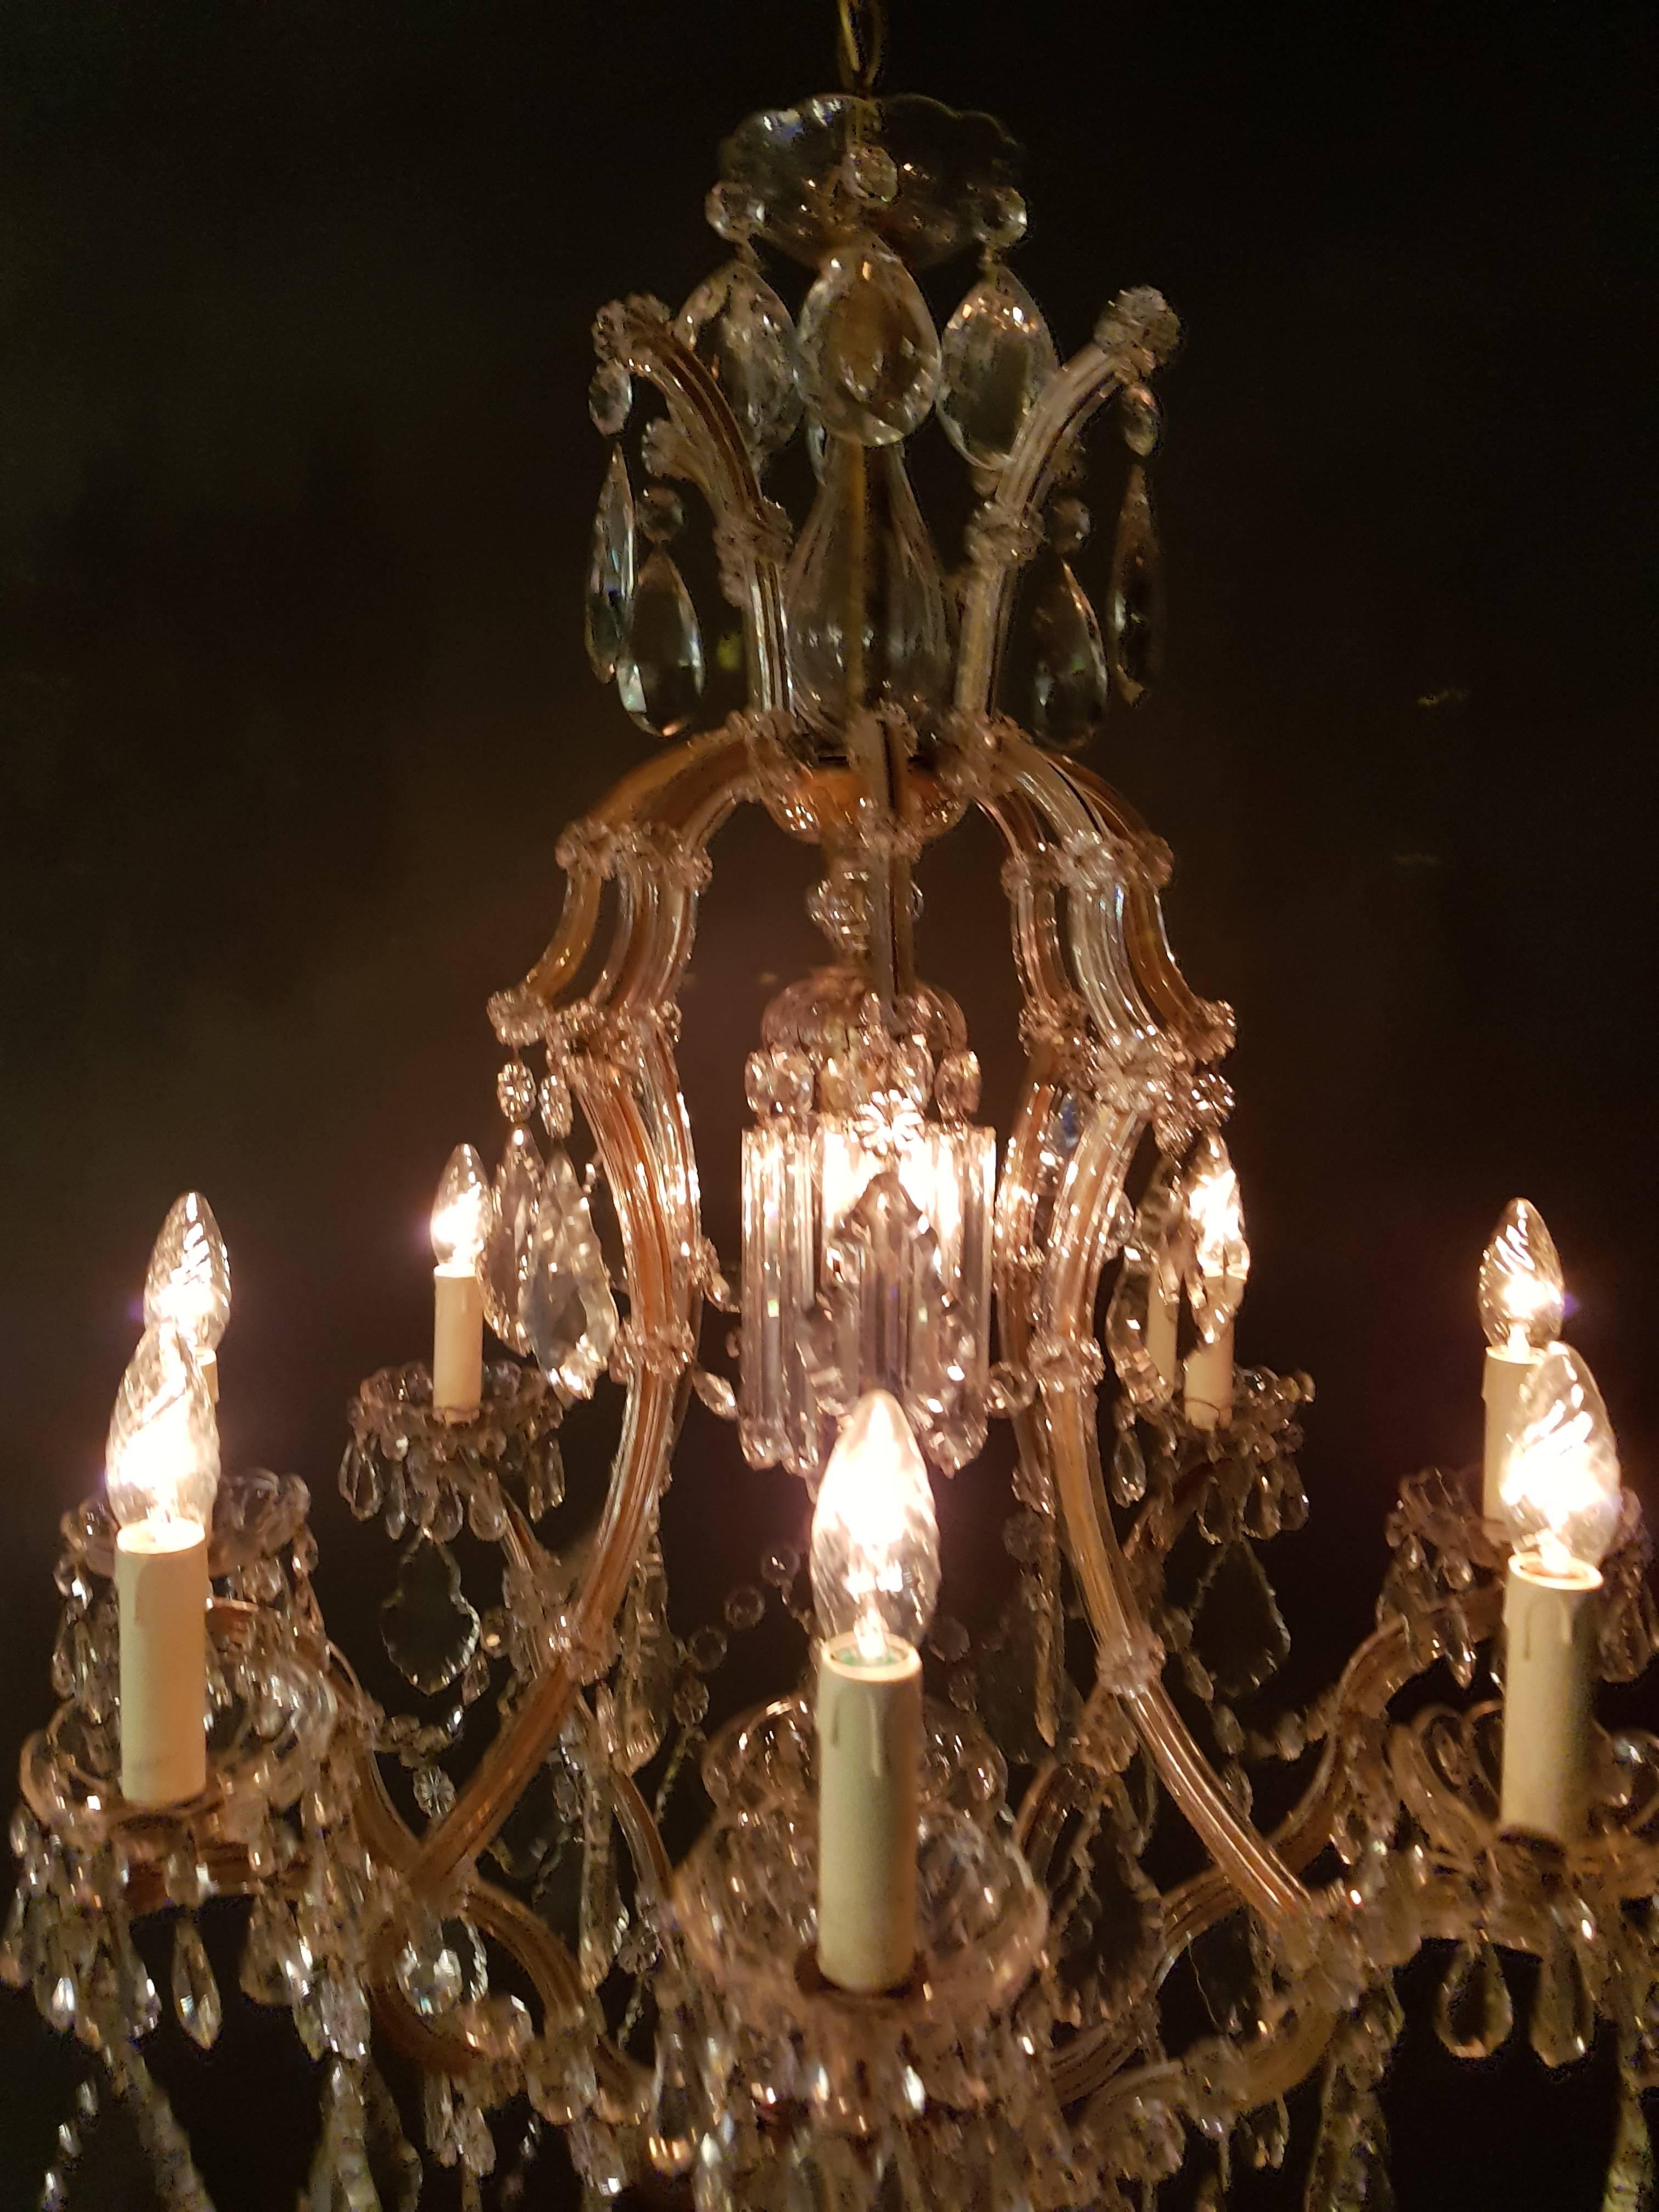 Hand-Woven Maria Theresa Crystal Chandelier Antique Ceiling Lamp Lustre